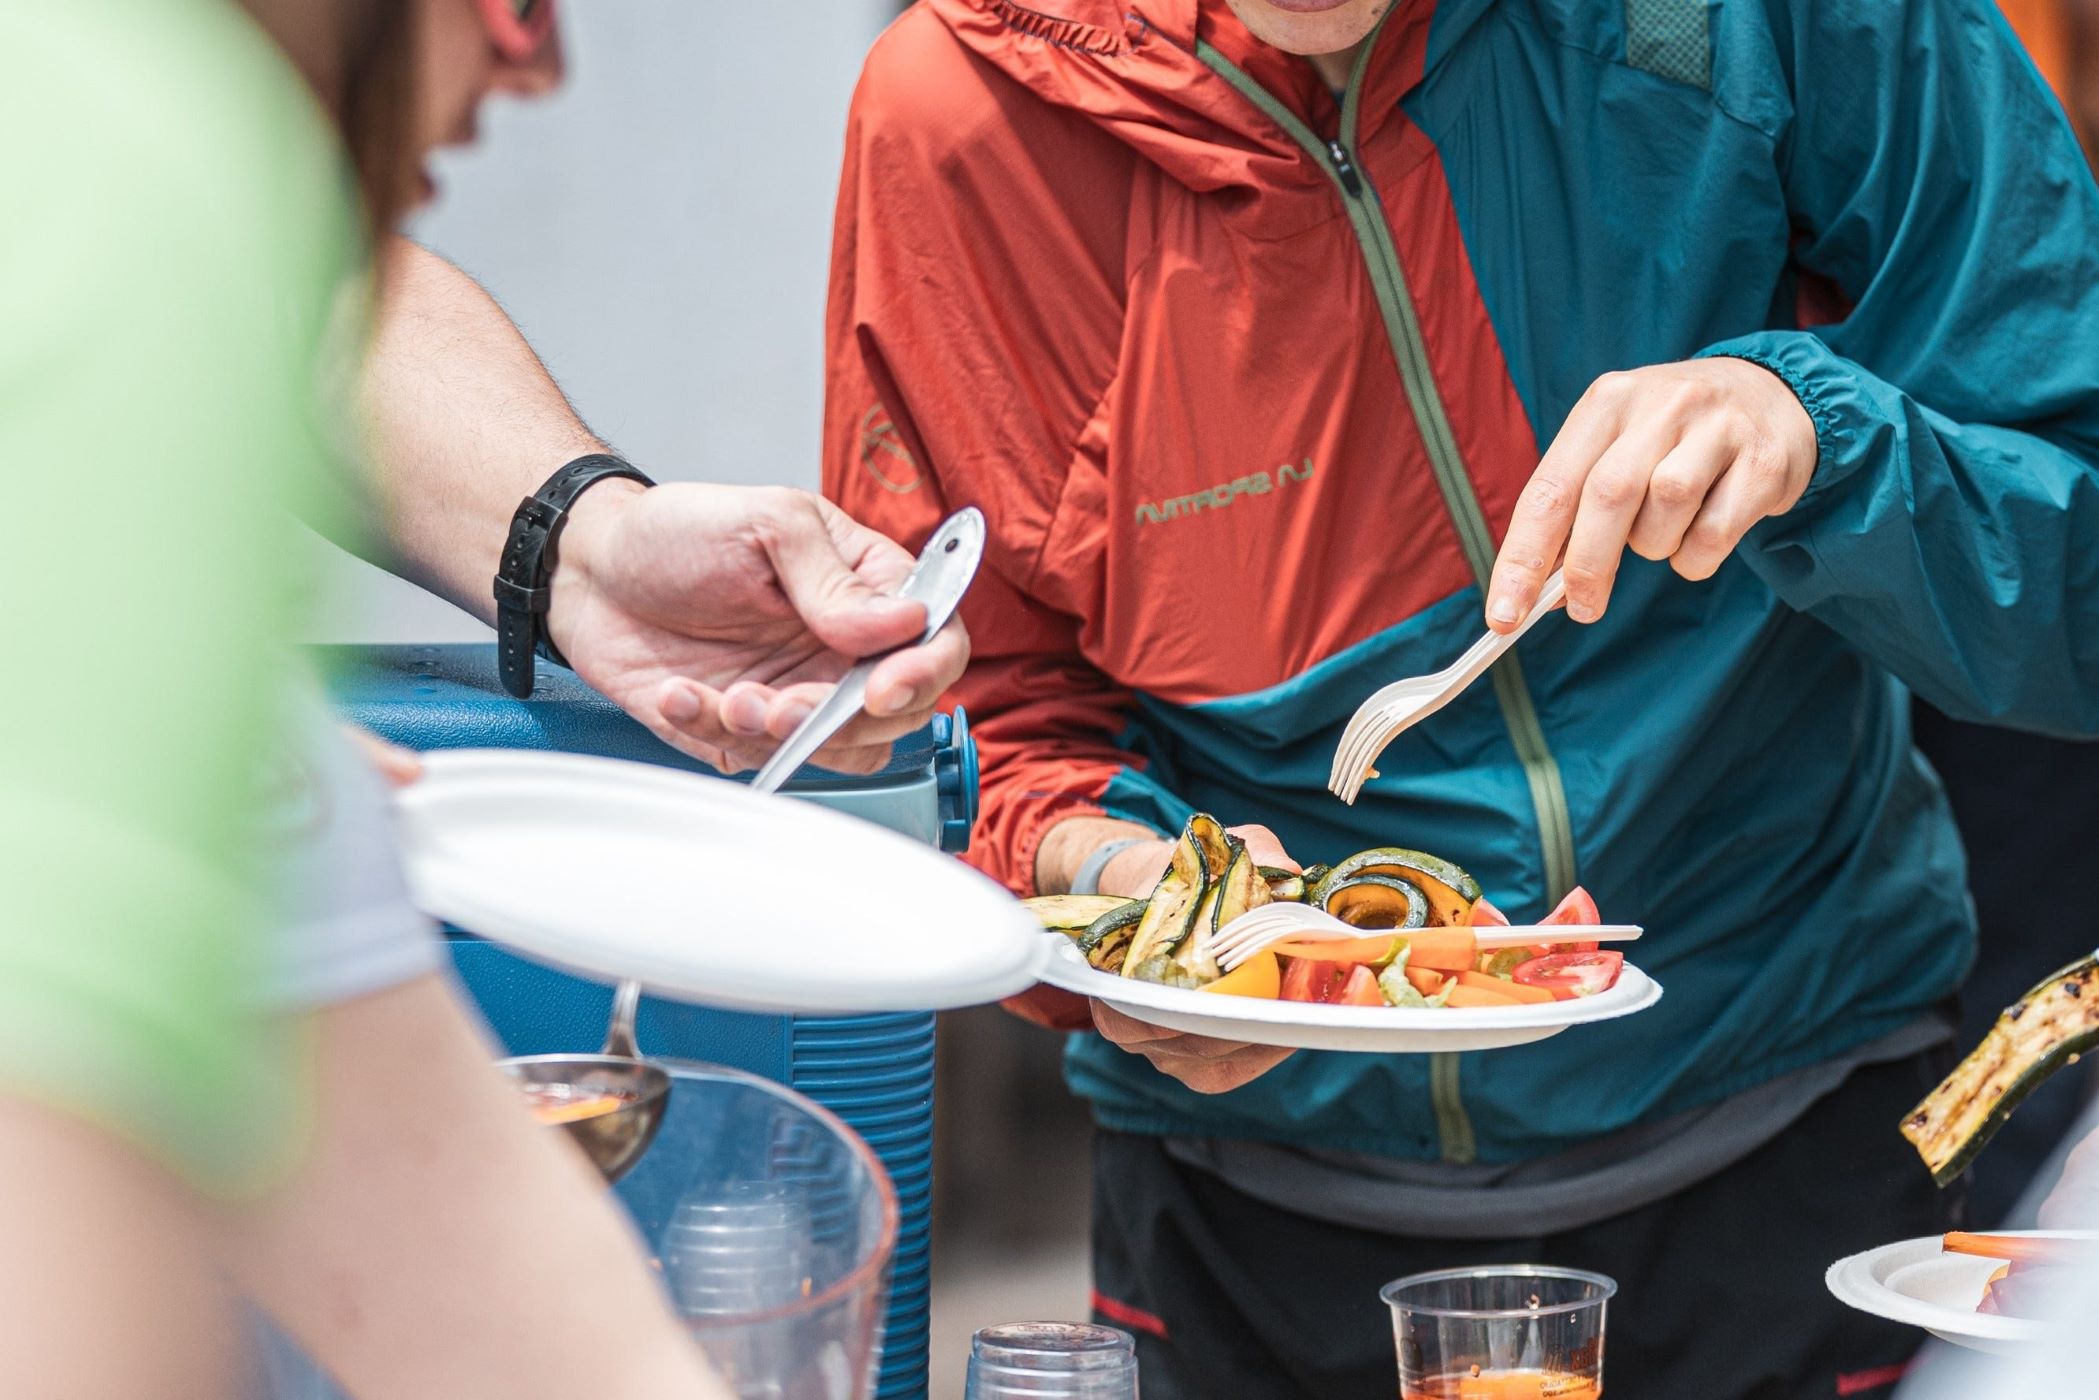 16 Experts In Running And Nutrition That You Should Follow